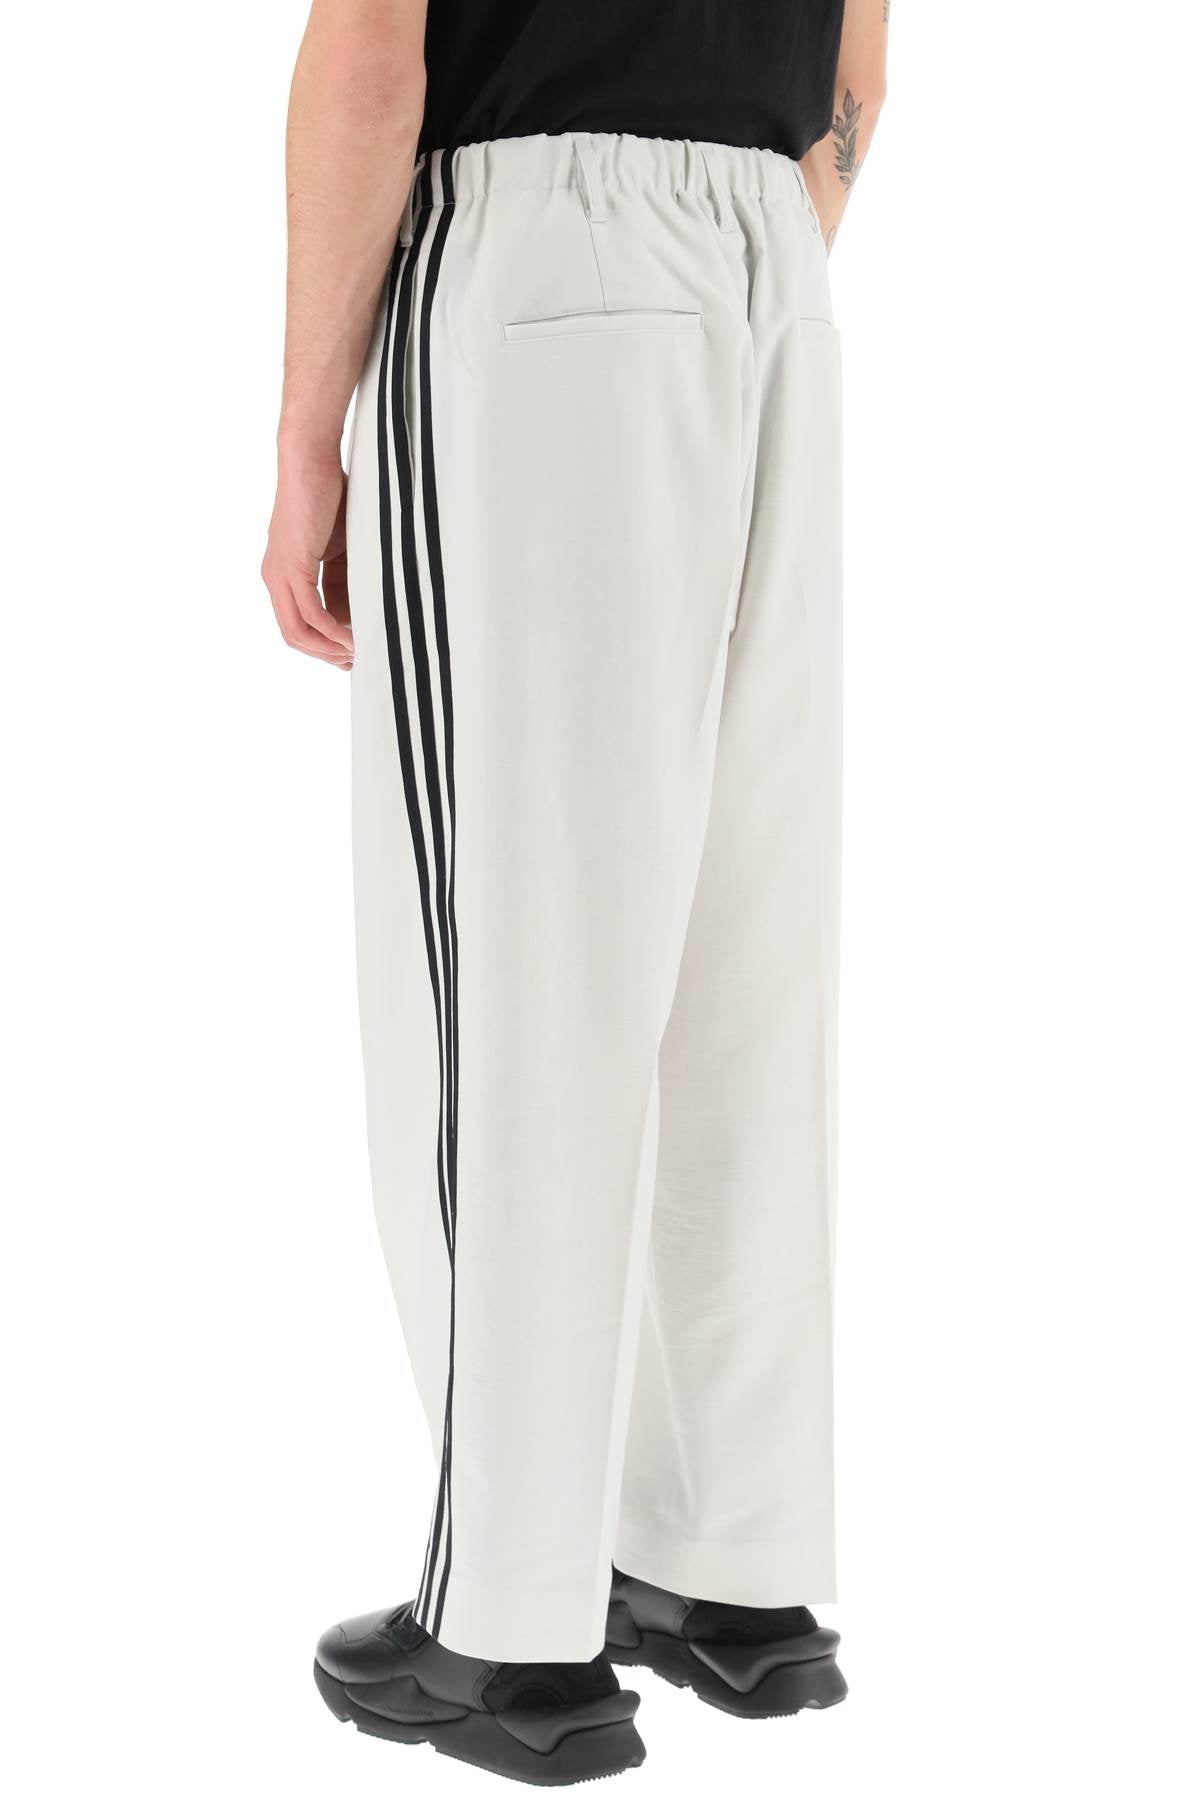 Y-3 lightweight twill pants with side stripes-2